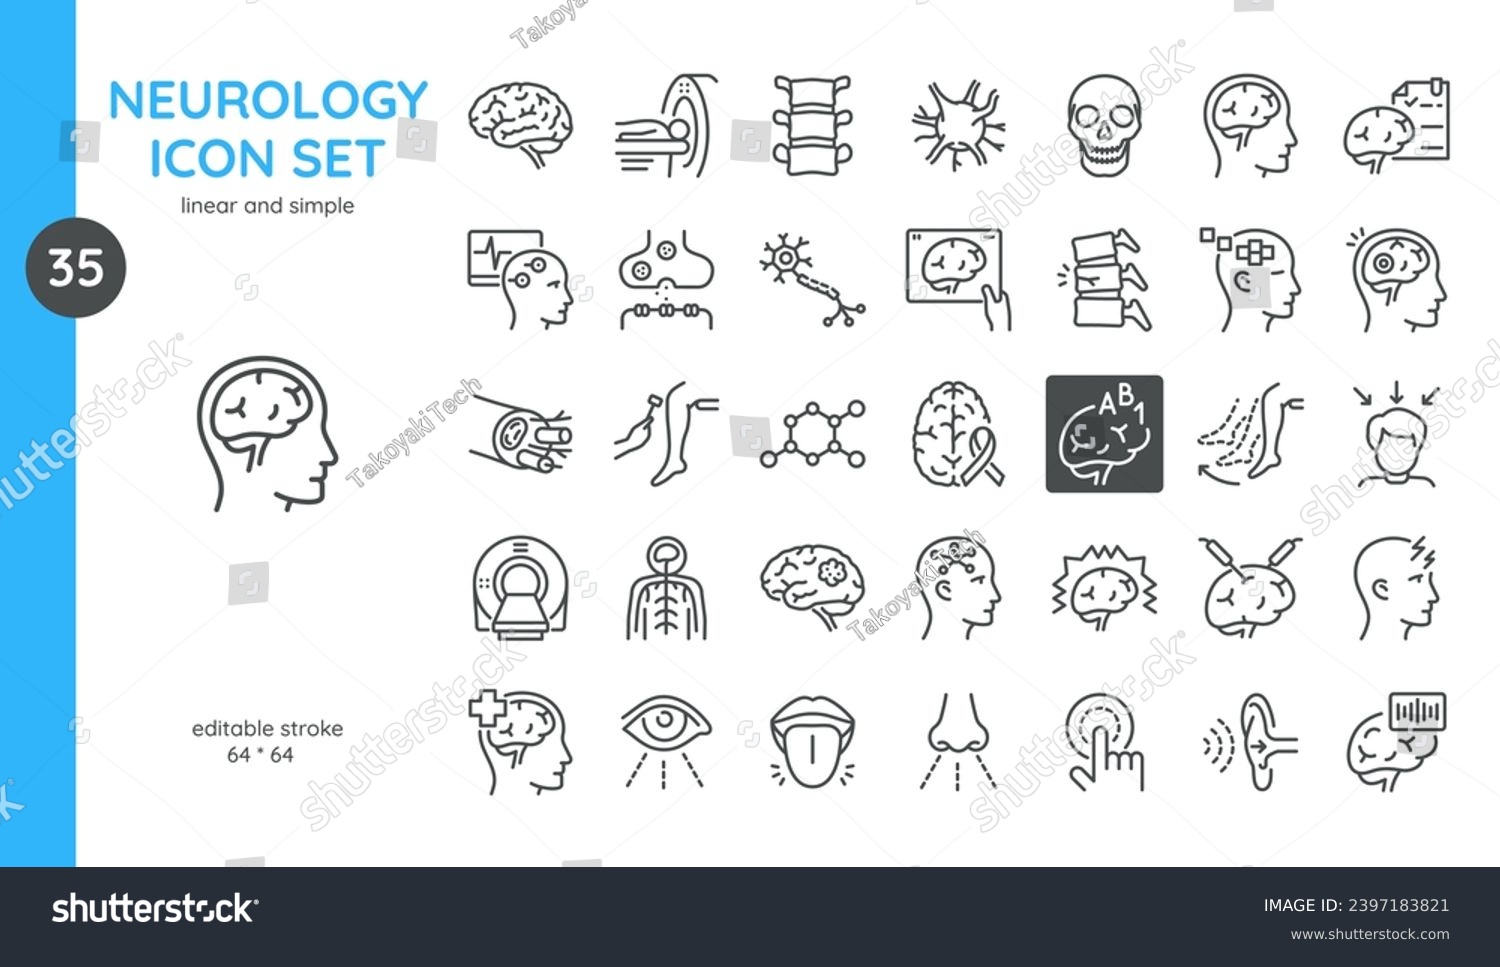 Neurology Icons Set. Thin Linear Illustrations of Brain, Neuron, Spinal cord, Synapse, MRI and CT Scan, Perceptions, Mental Health Diagnostics and Examination. Isolated Outline Vector Signs.  #2397183821